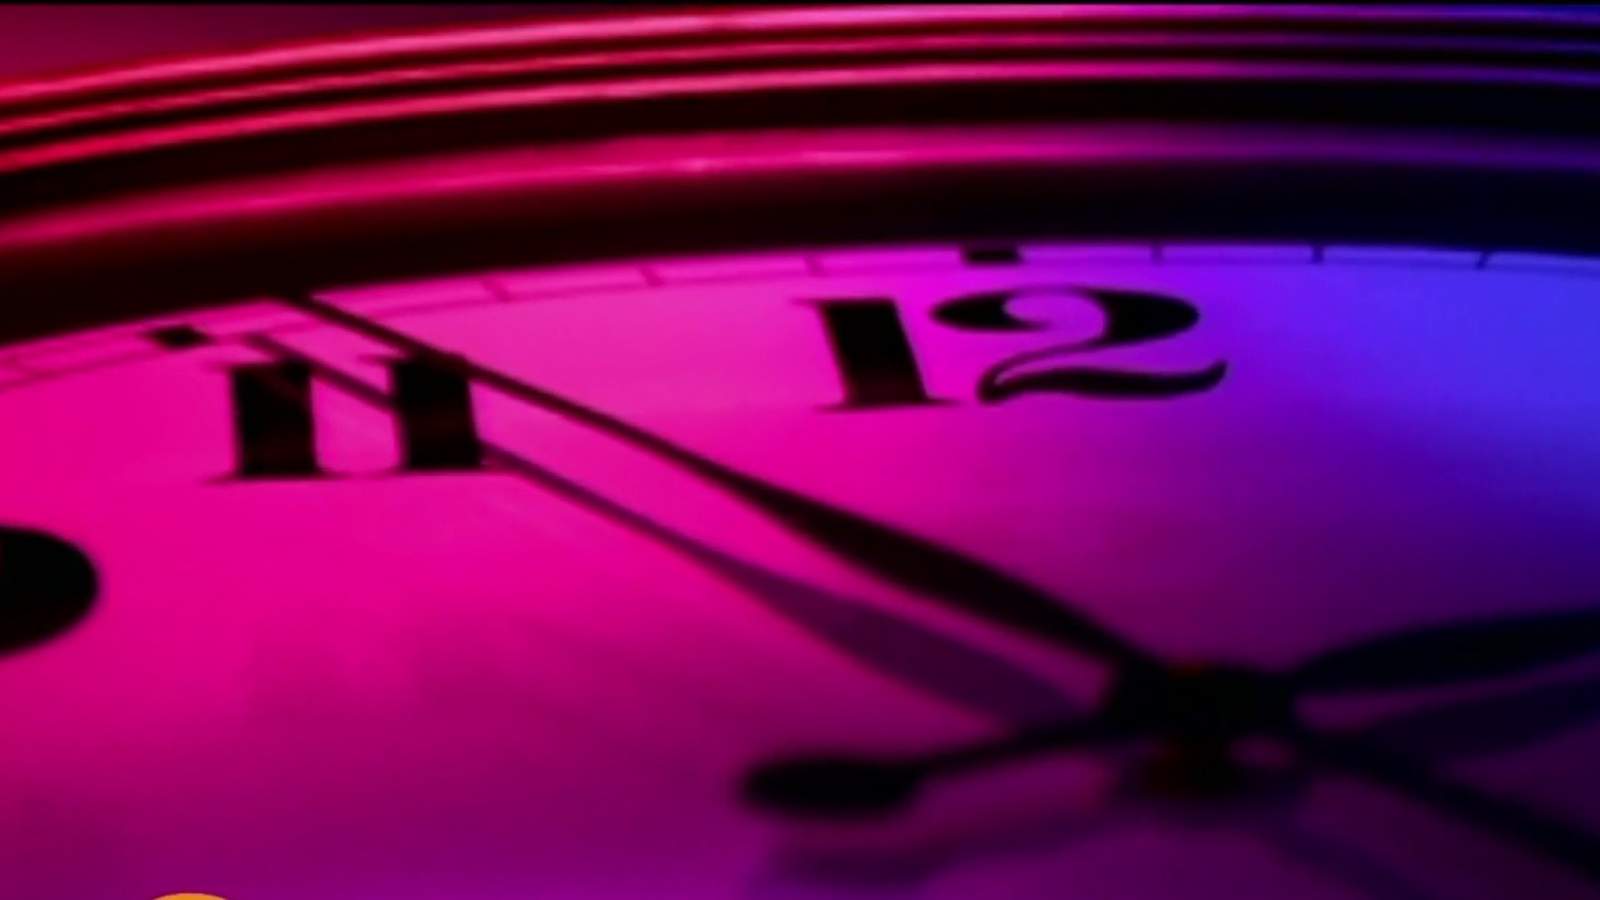 Clocks turn back one hour as Daylight Saving Time ends on Sunday